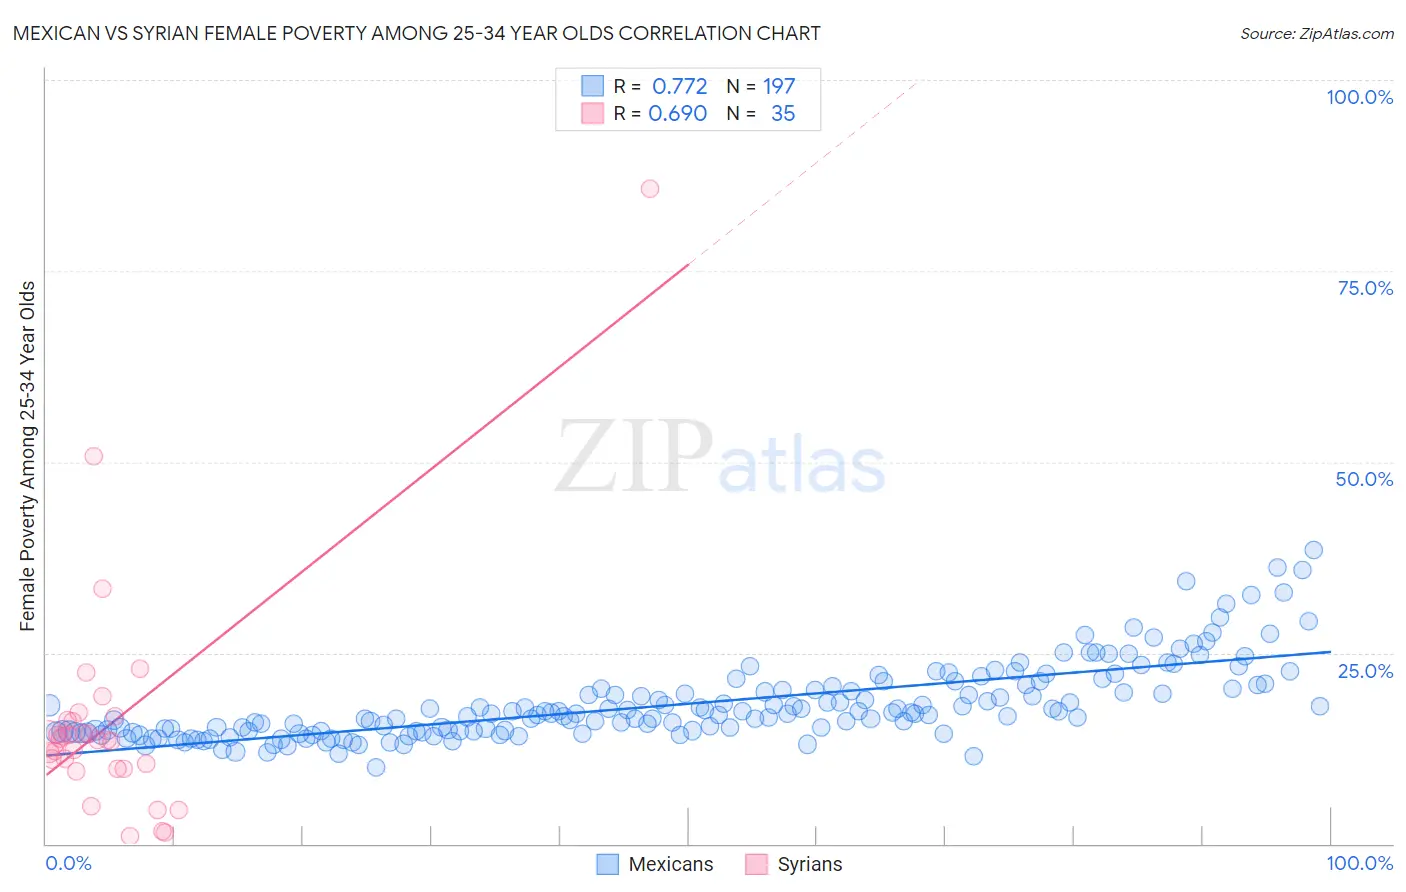 Mexican vs Syrian Female Poverty Among 25-34 Year Olds